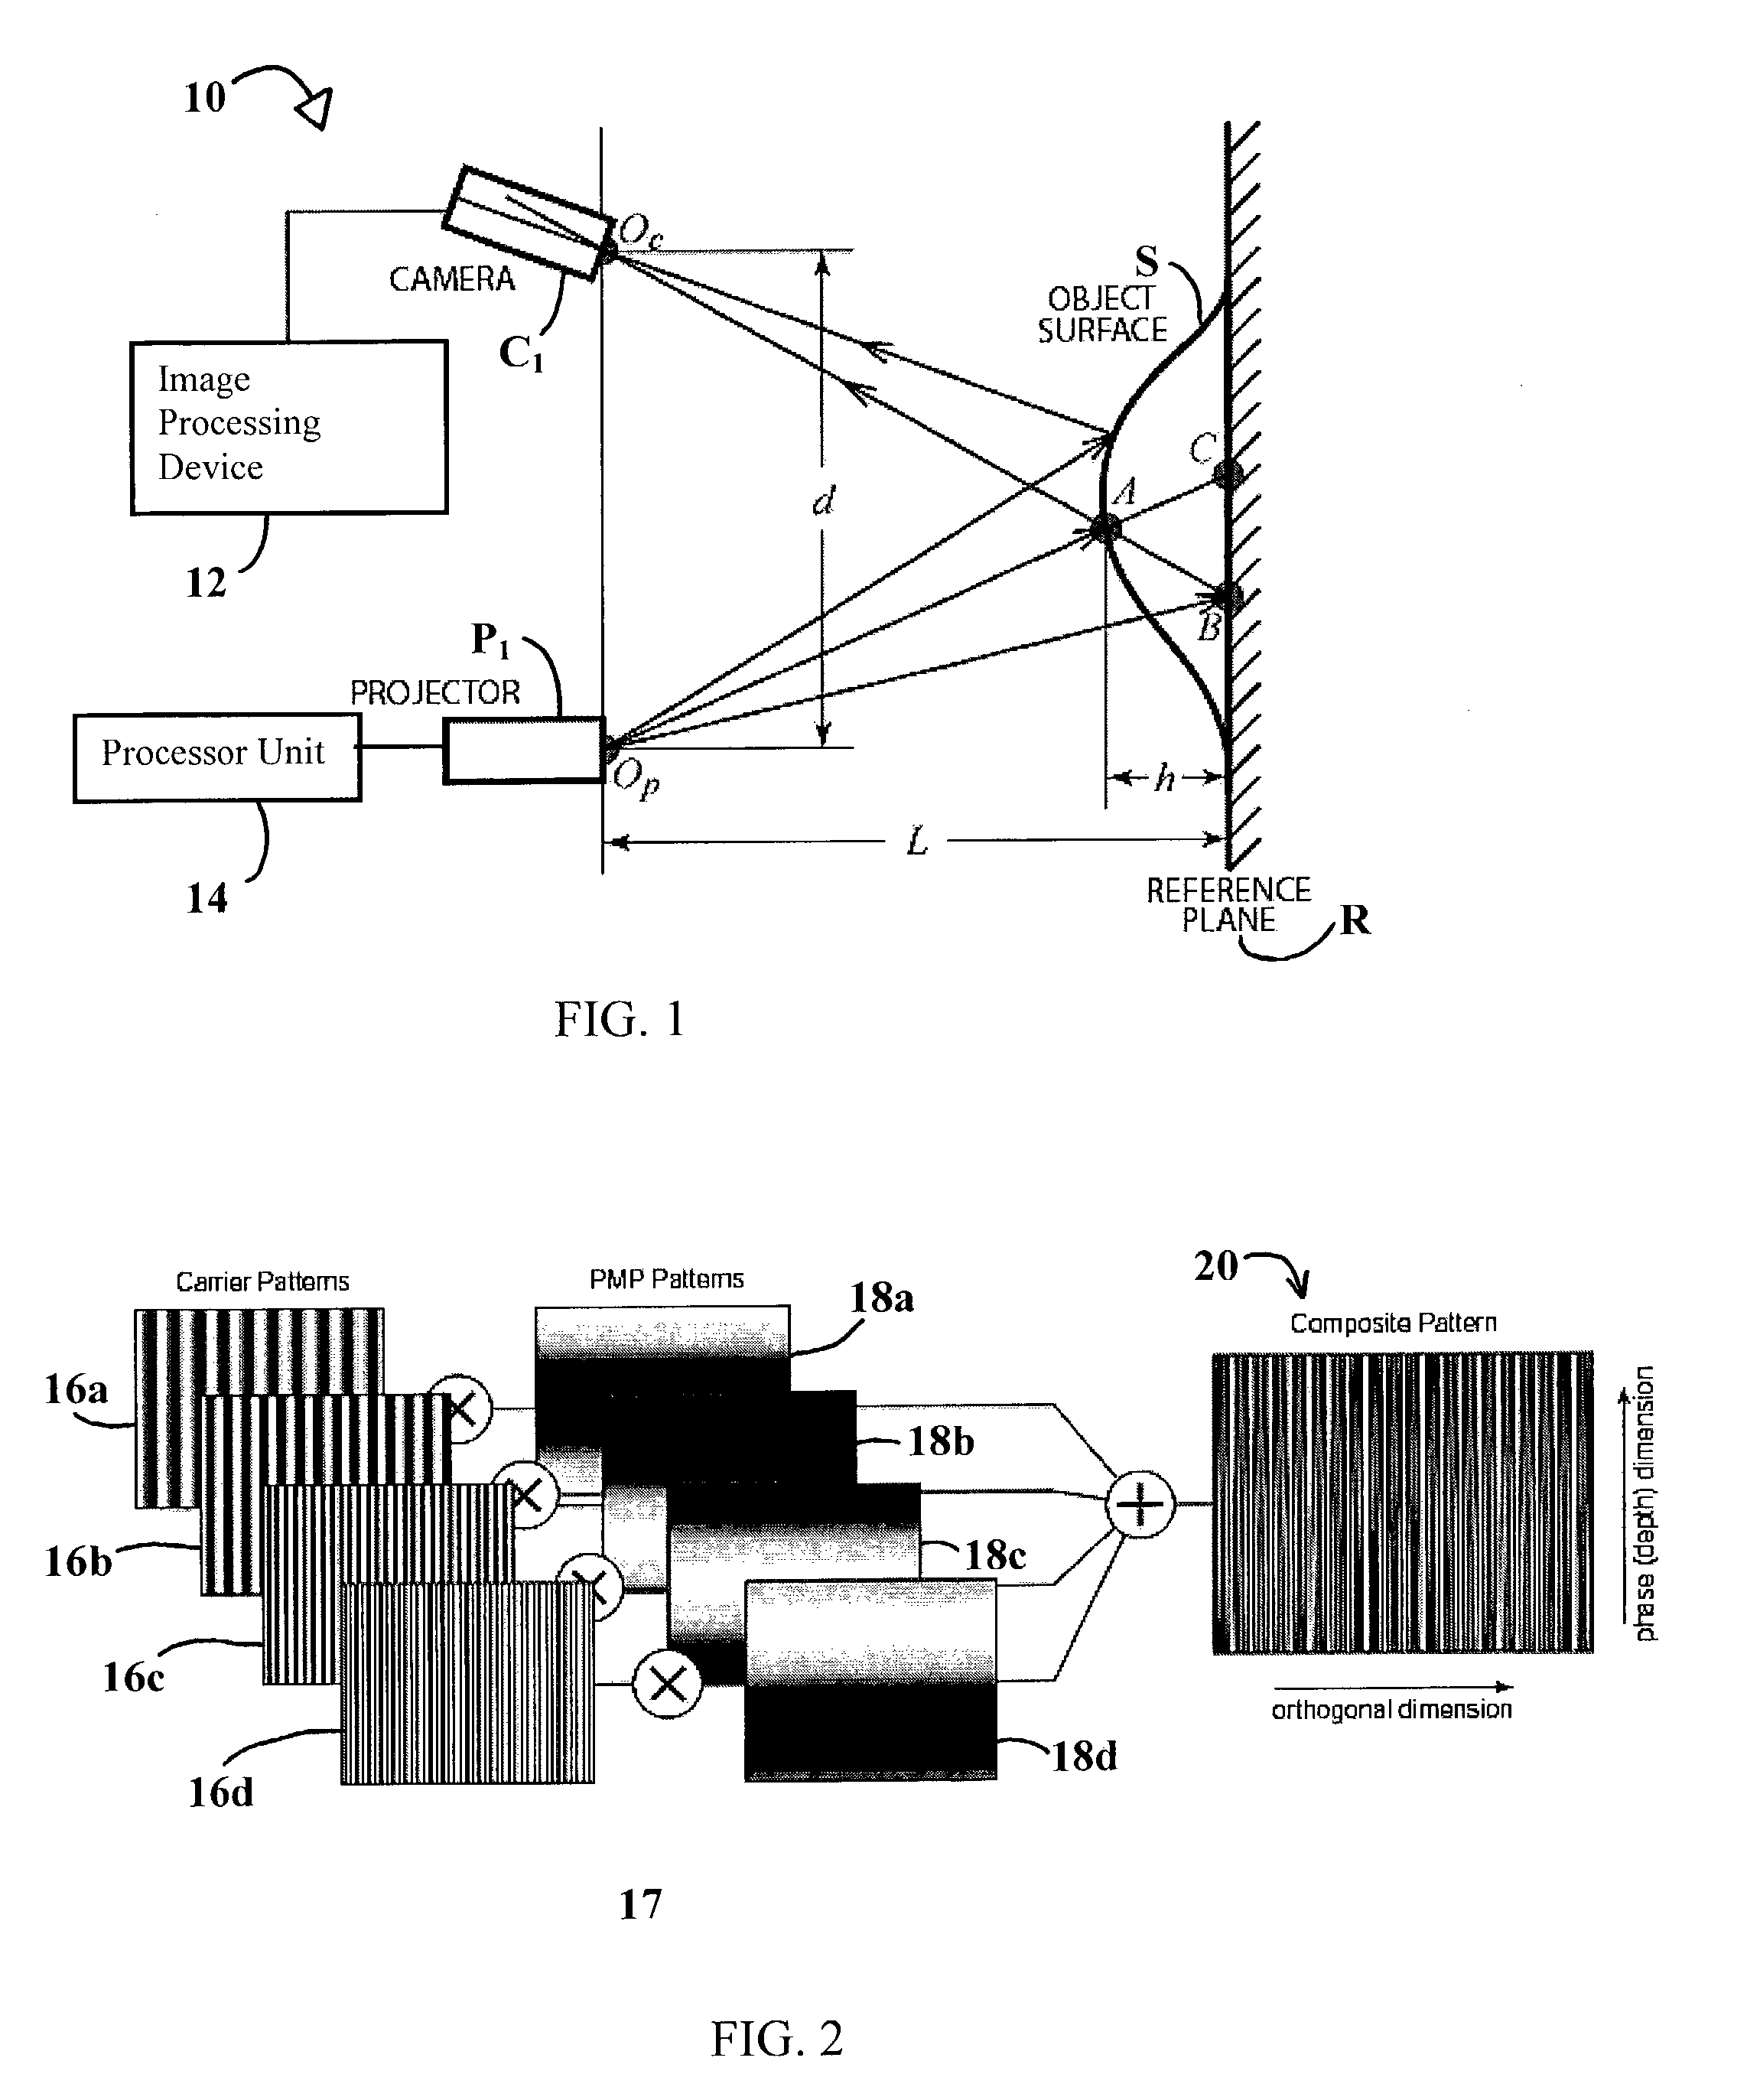 System and technique for retrieving depth information about a surface by projecting a composite image of modulated light patterns